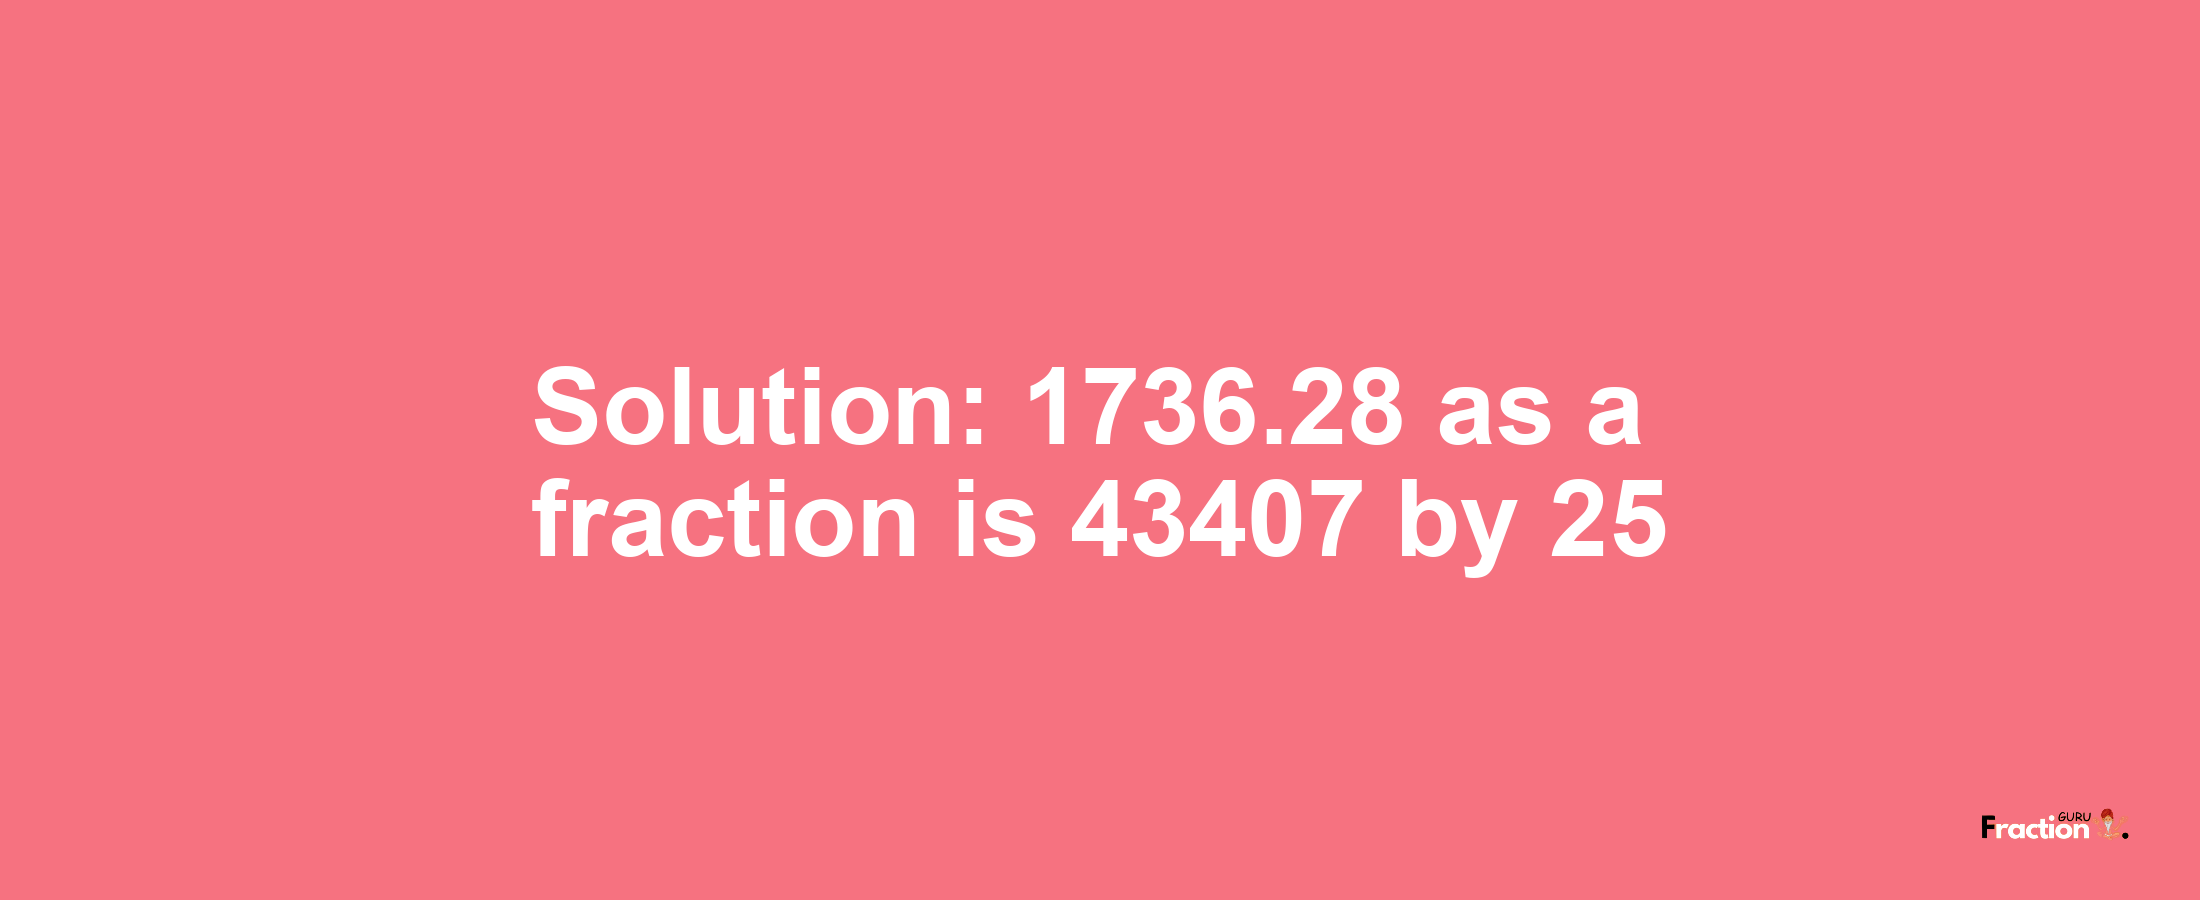 Solution:1736.28 as a fraction is 43407/25